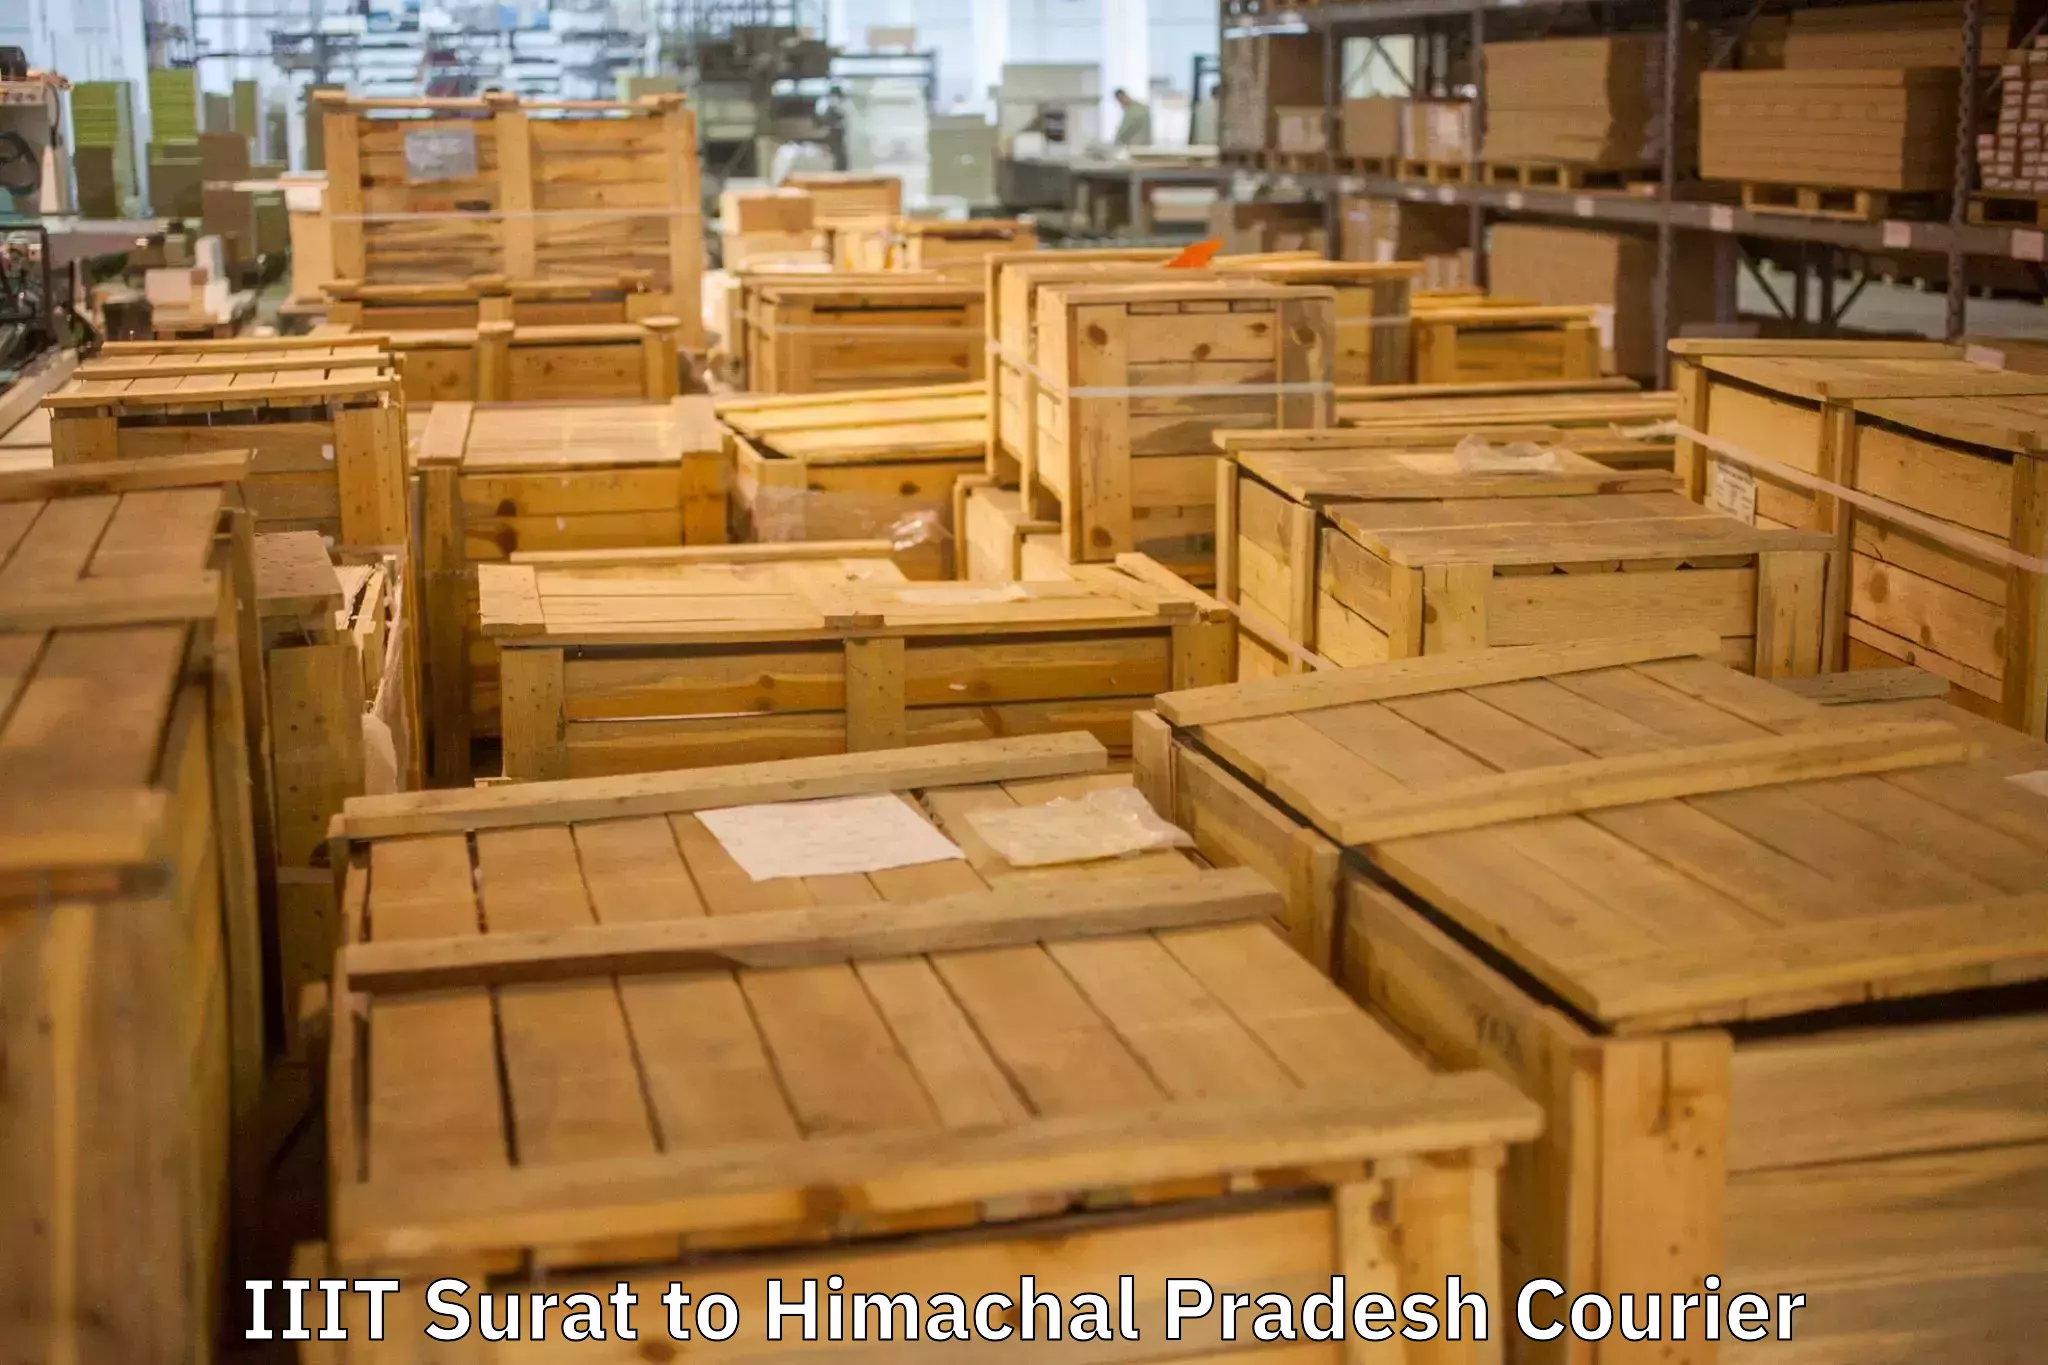 Trusted relocation services IIIT Surat to Nalagarh